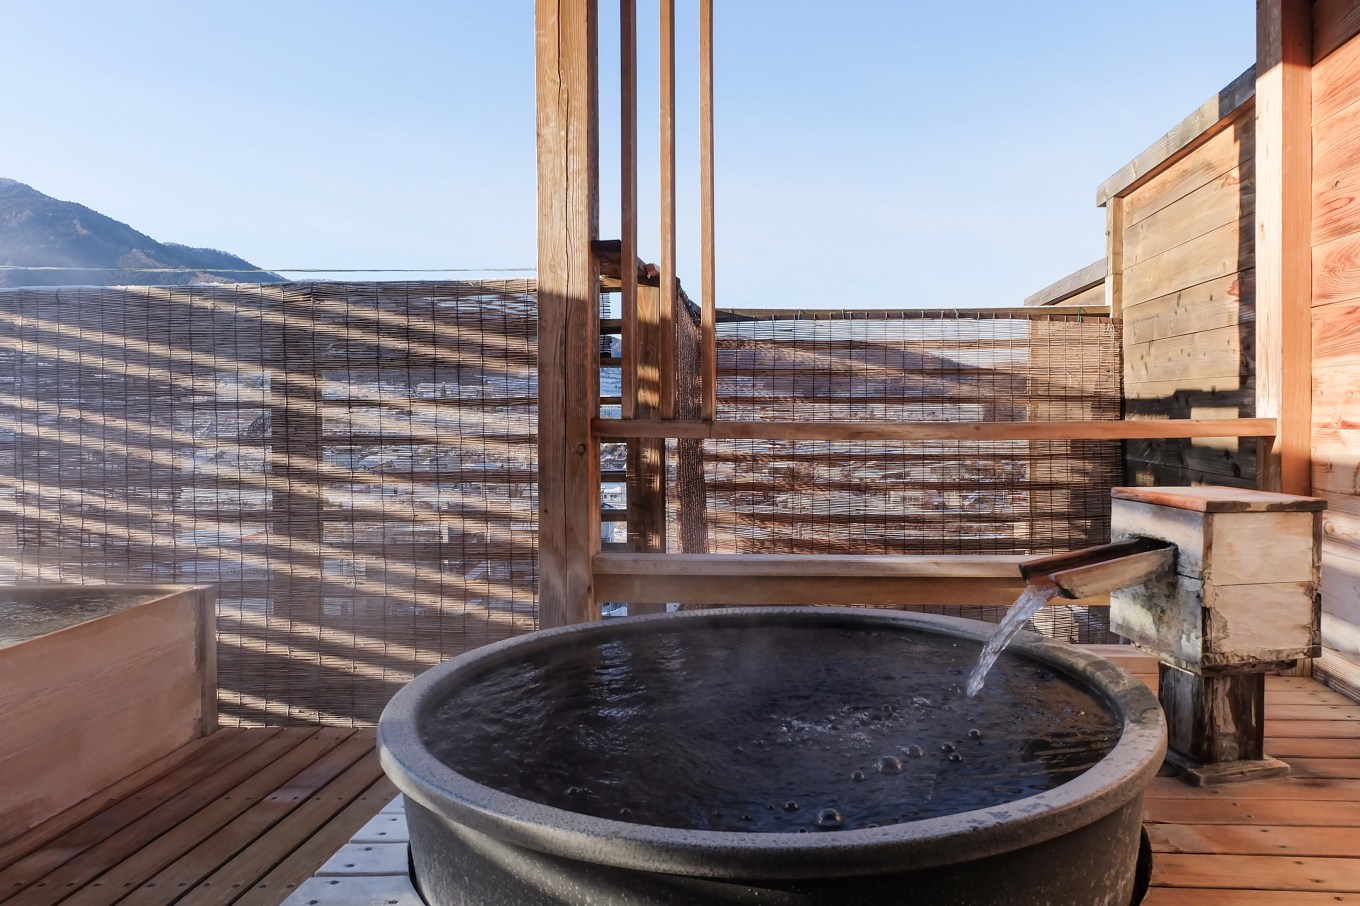 An above-ground, open-air plunge pool on a patio.